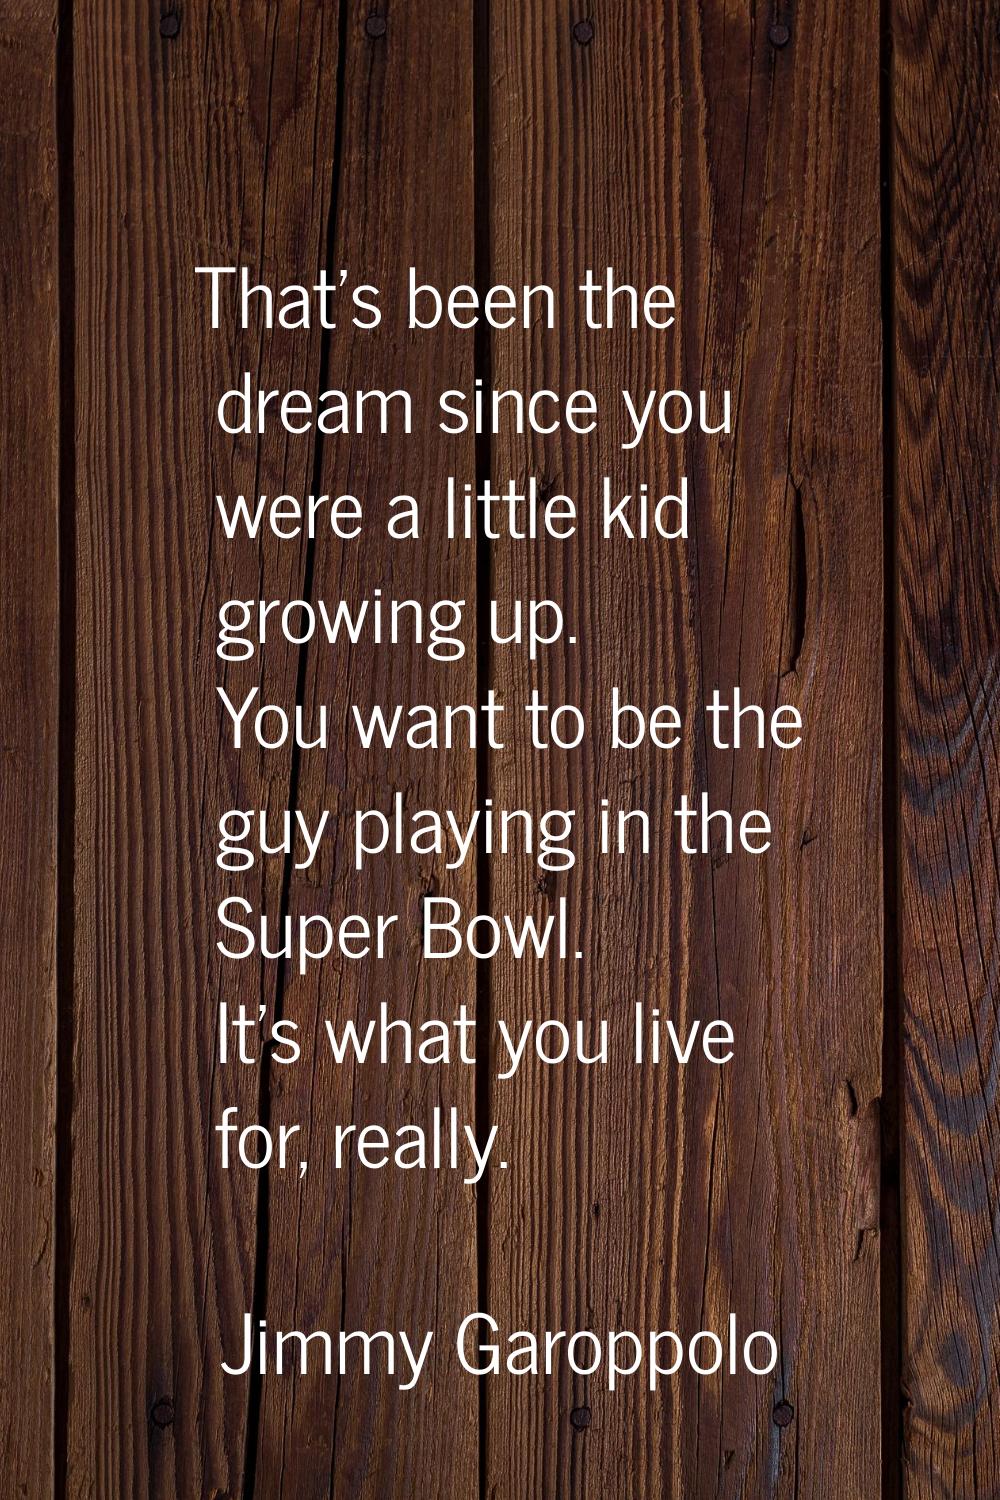 That's been the dream since you were a little kid growing up. You want to be the guy playing in the